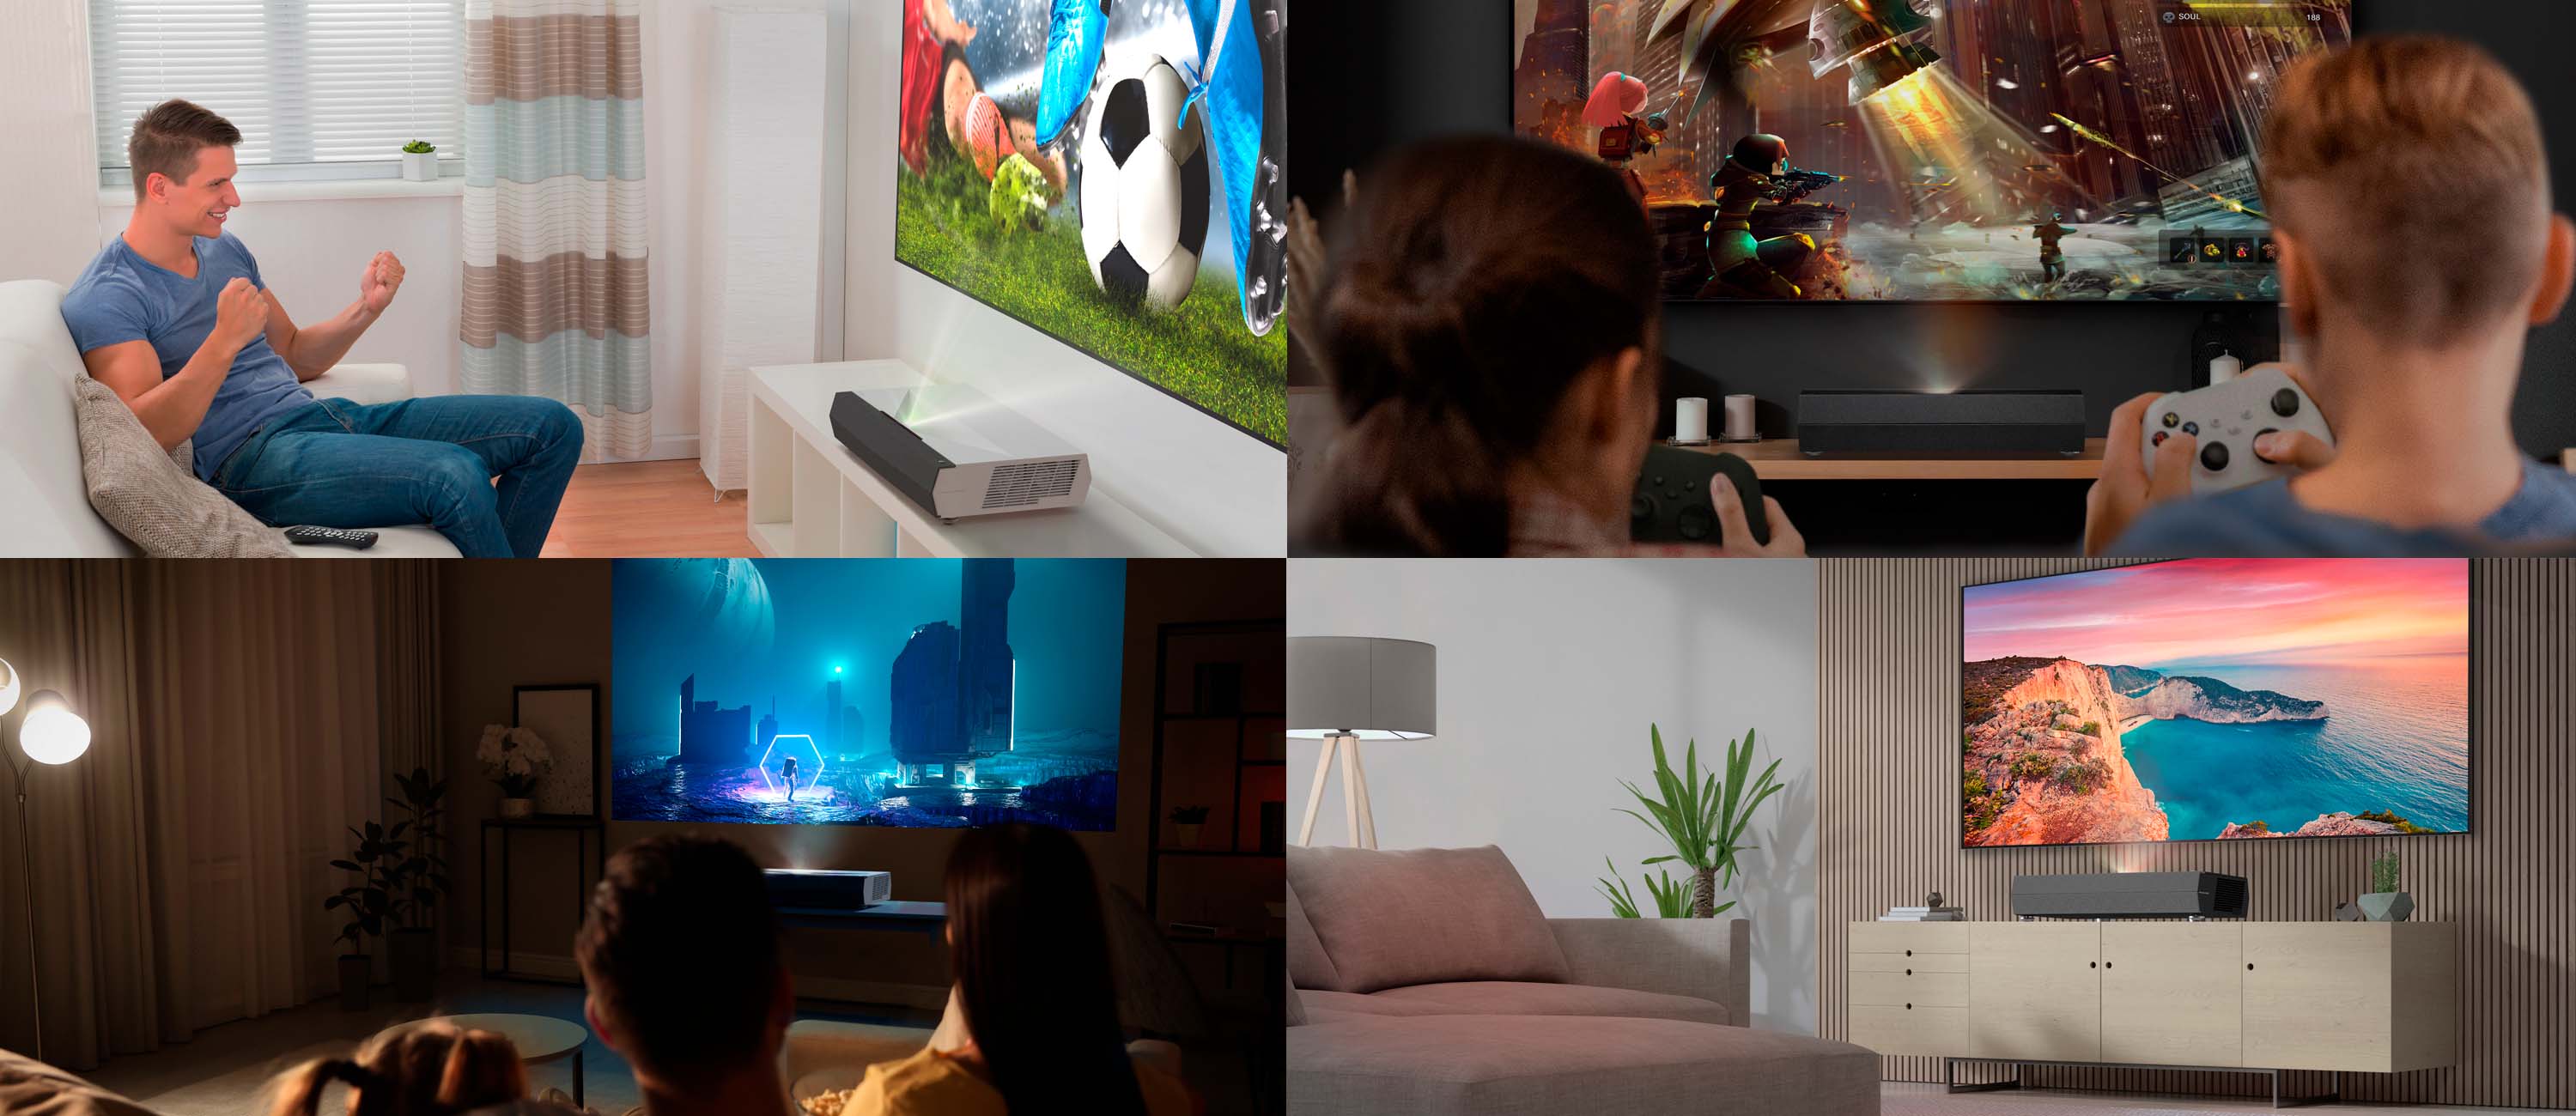 Big screen experience in any living space